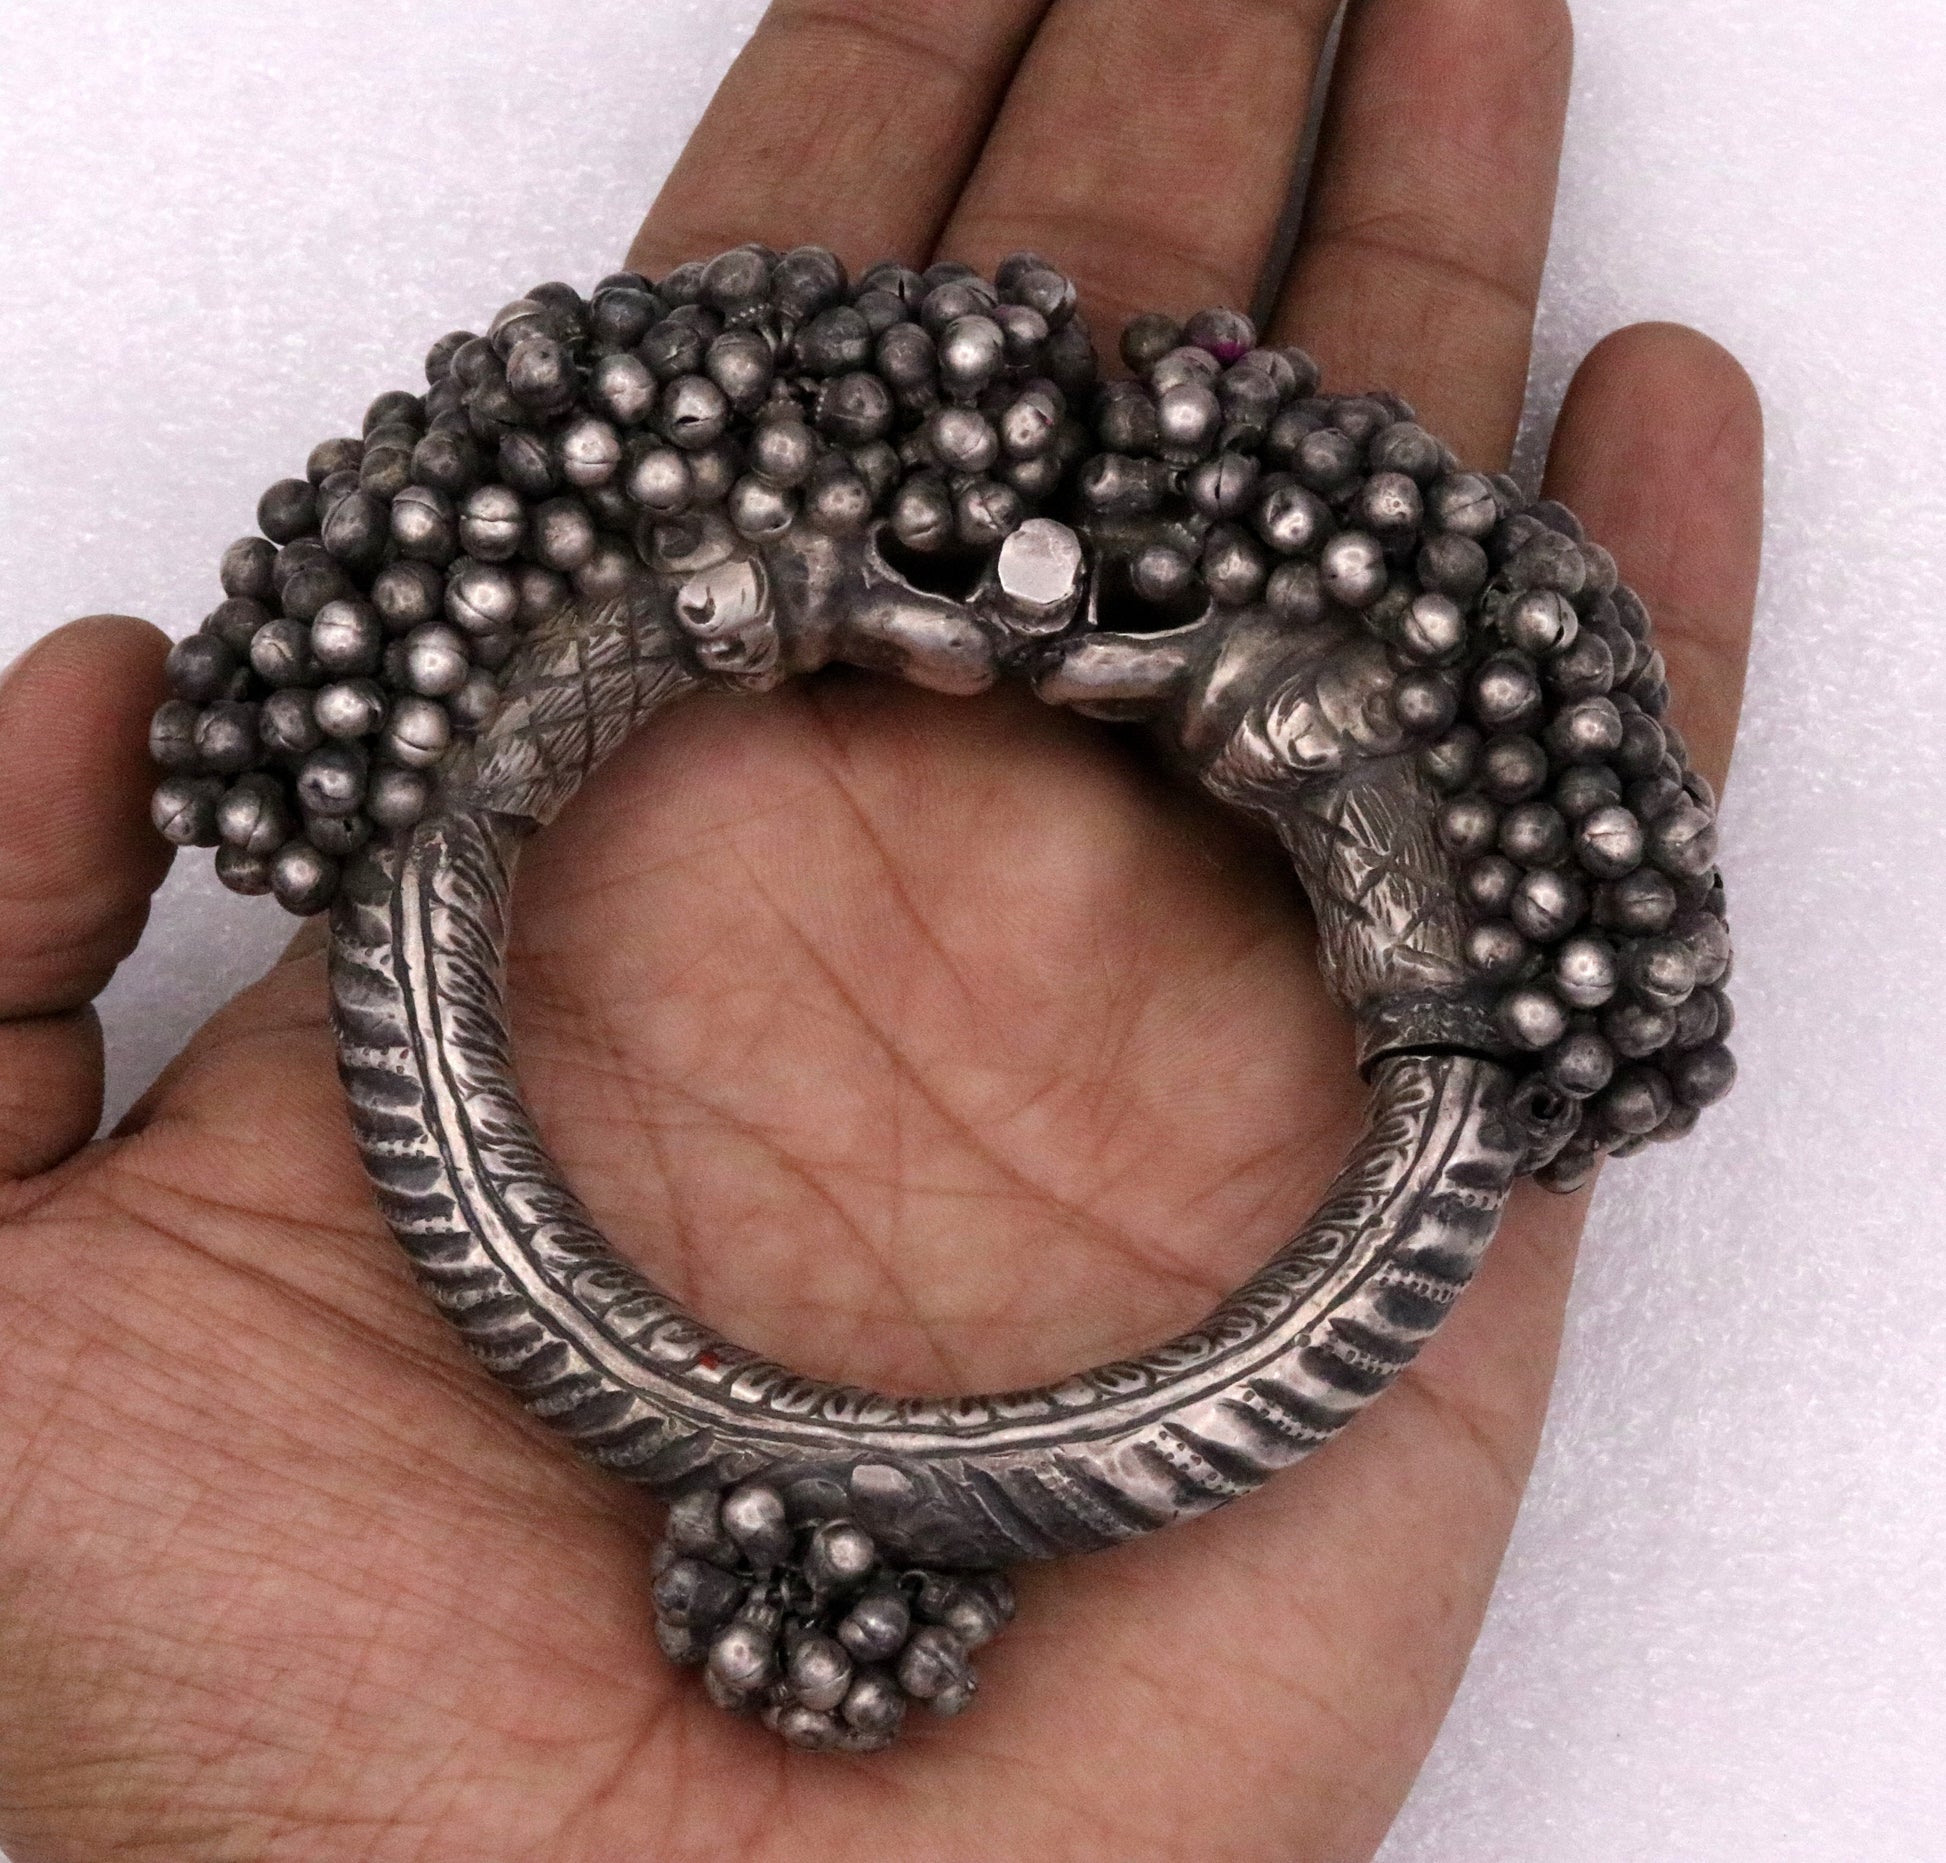 Vintage Original antique worn old silver bangle bracelet unique design rare indian tribal women's jewelry for belly dnace/ghoomar dance cb02 - TRIBAL ORNAMENTS